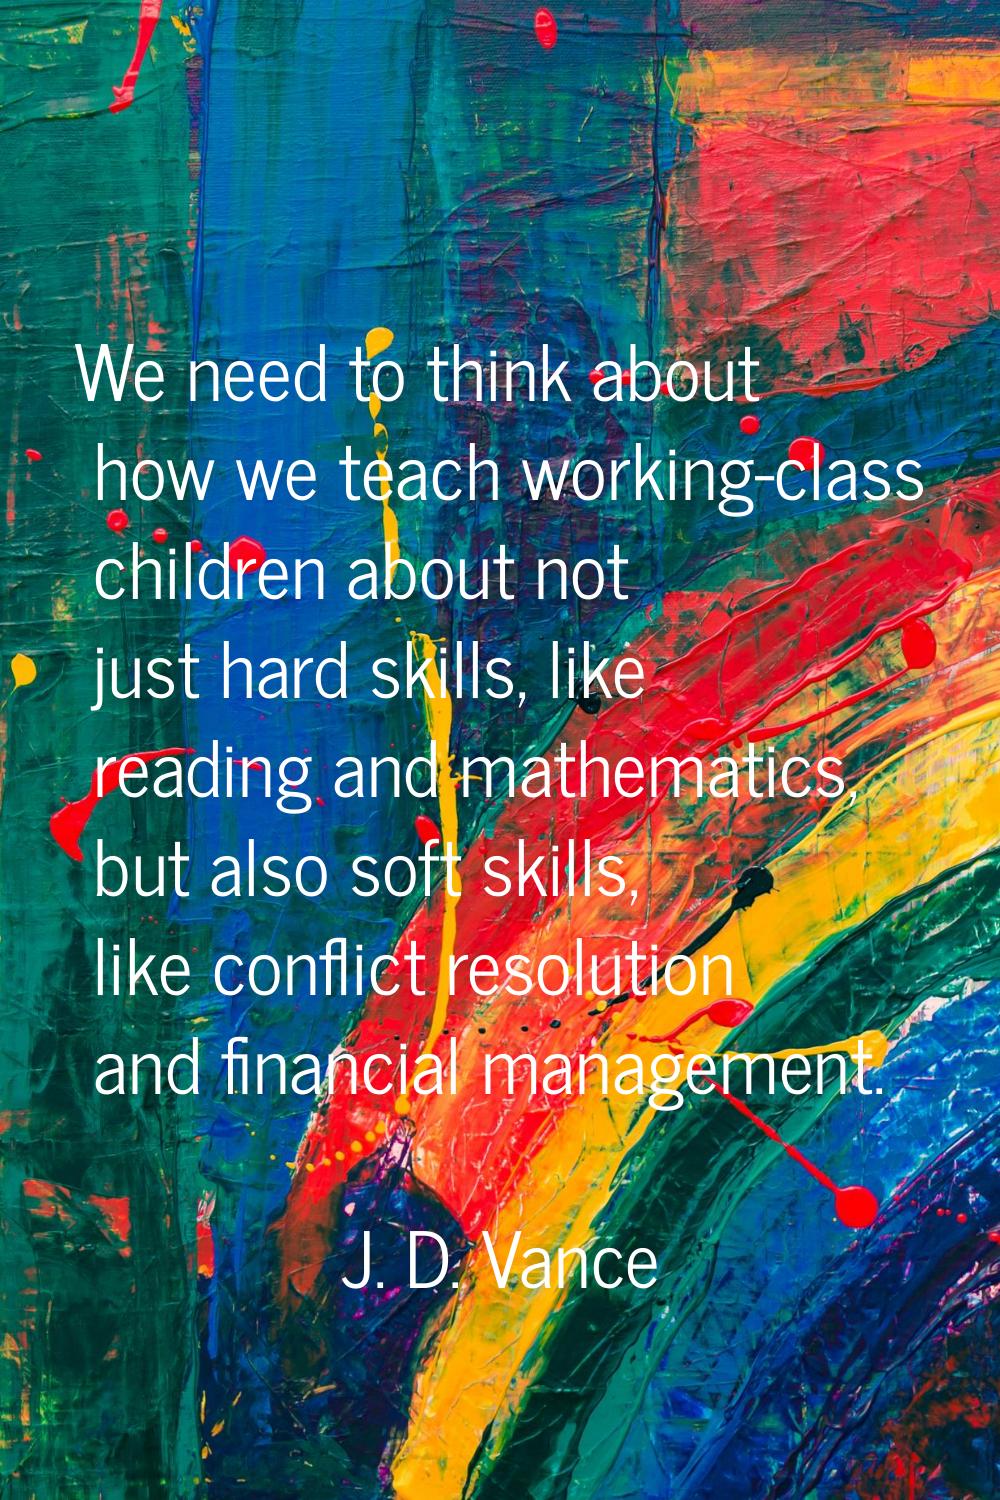 We need to think about how we teach working-class children about not just hard skills, like reading